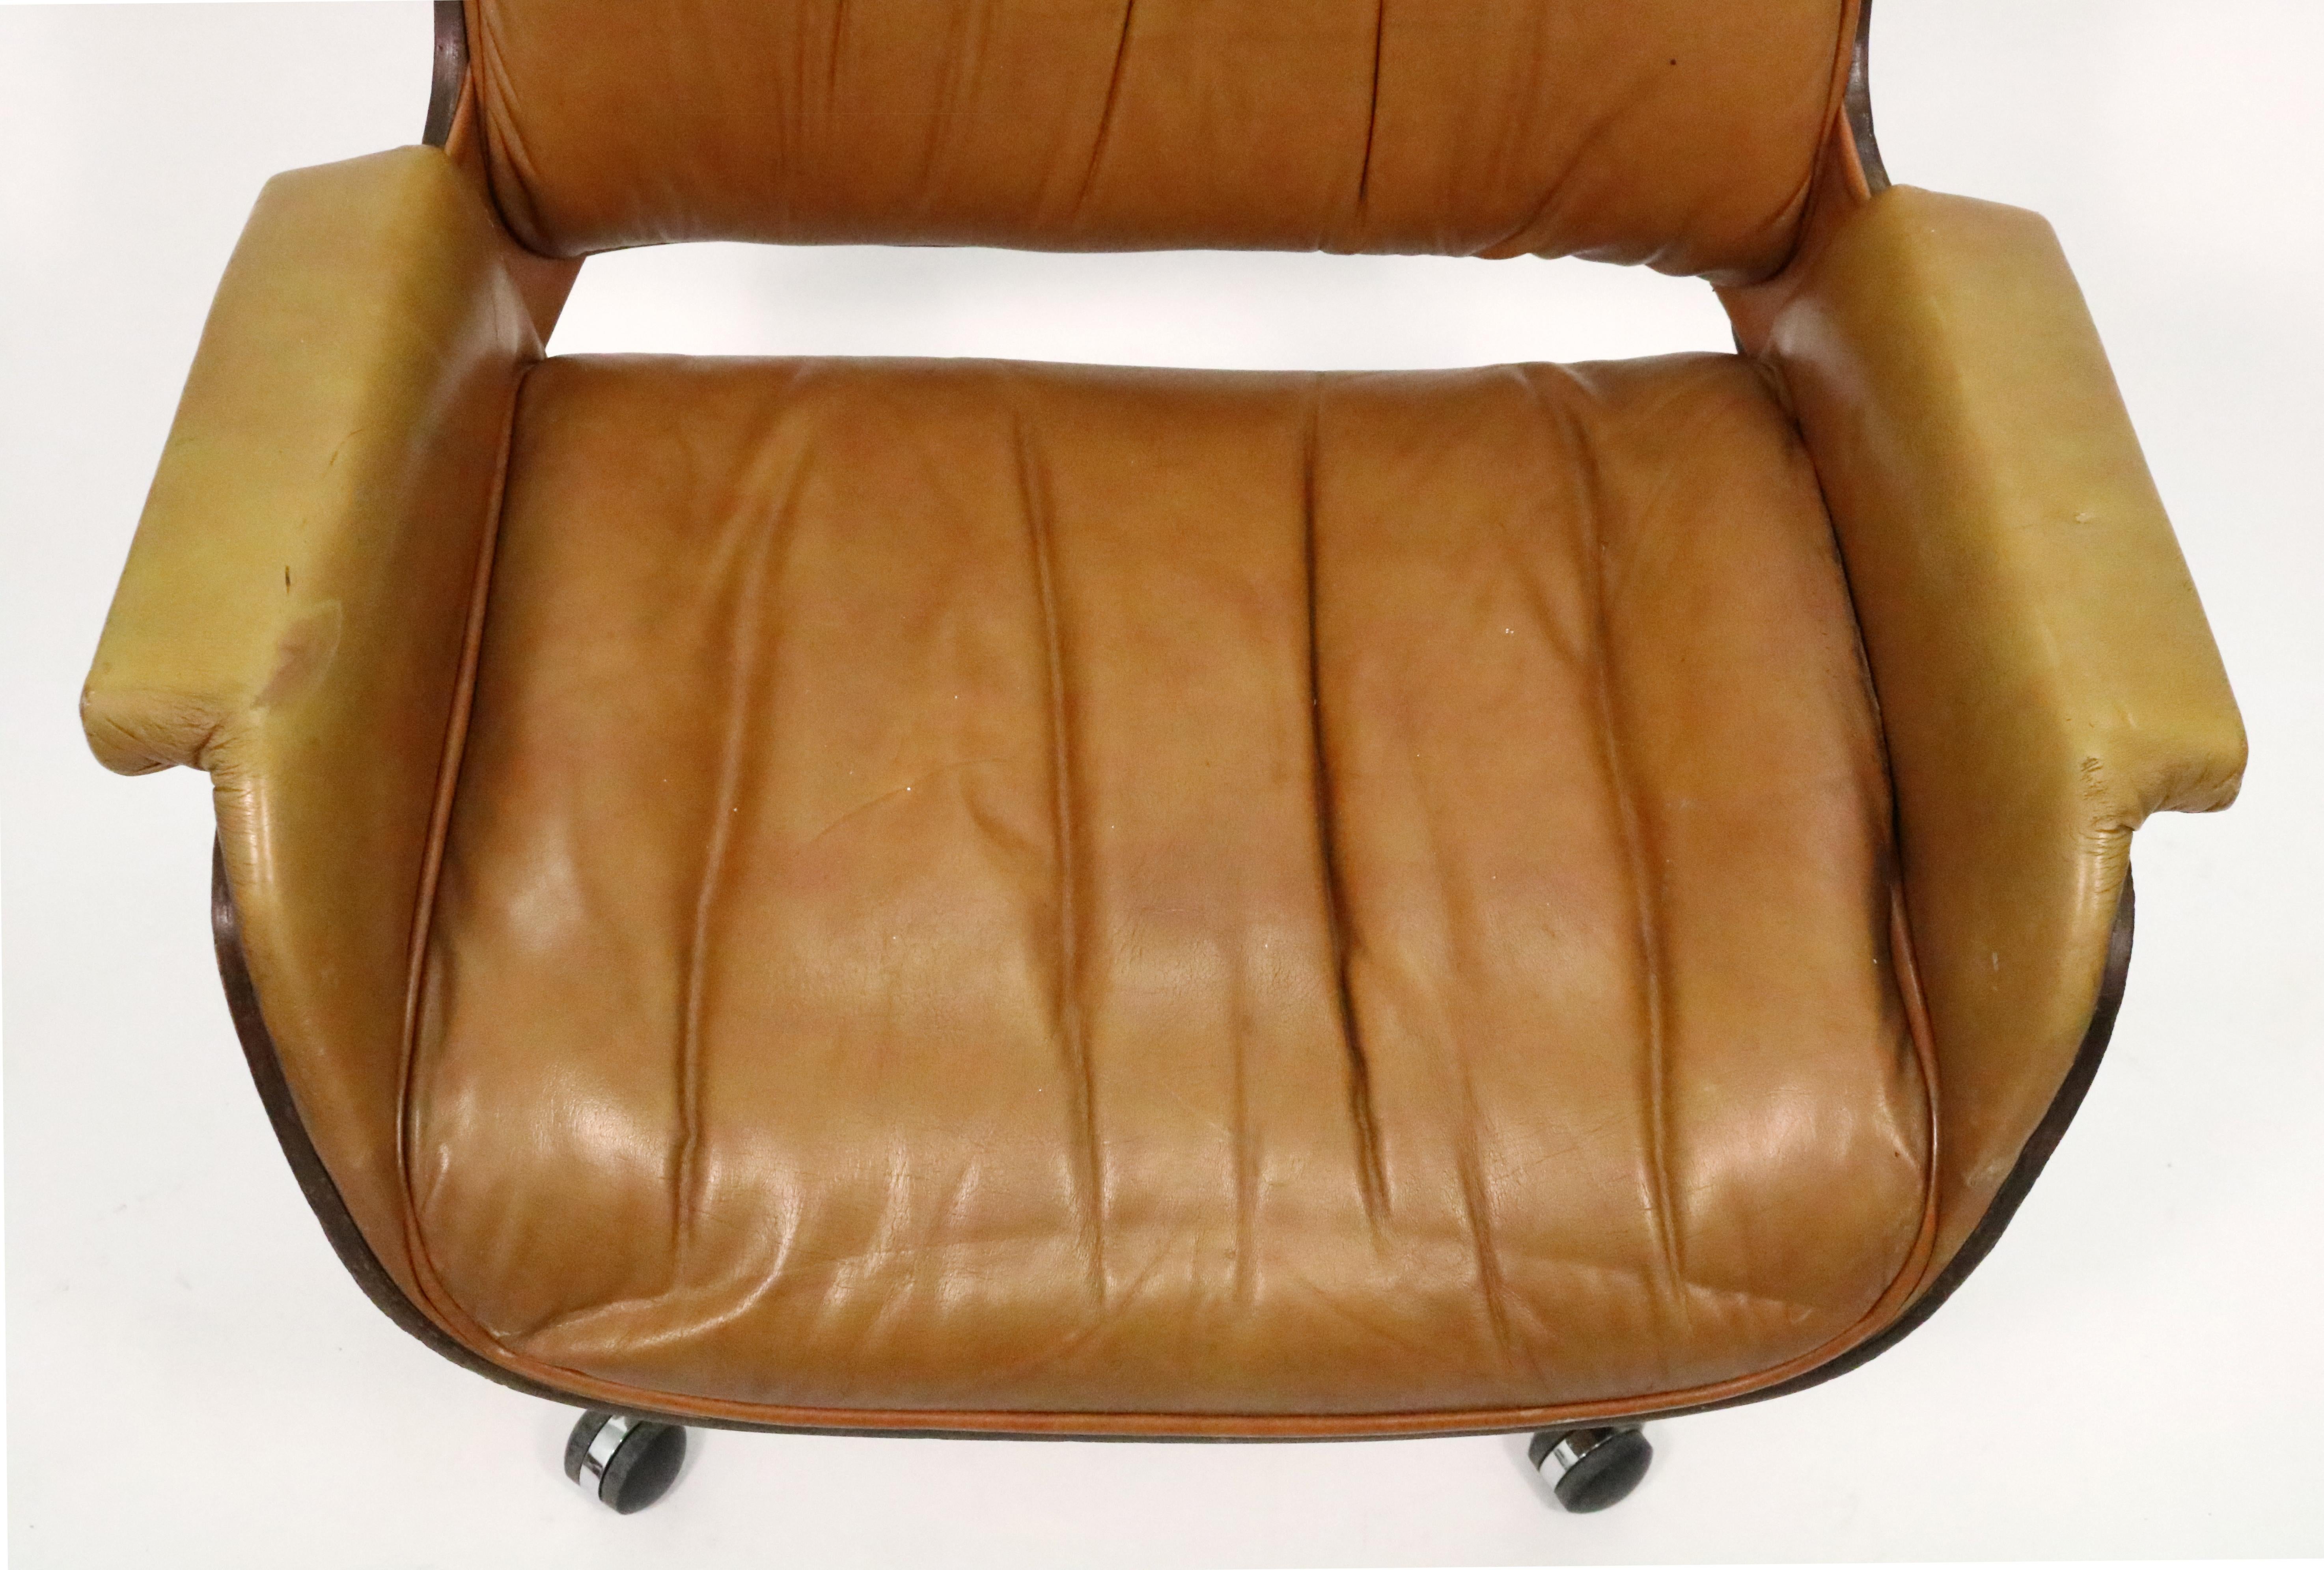 Molded George Mulhauser for Plycraft Cognac Leather Desk Chair